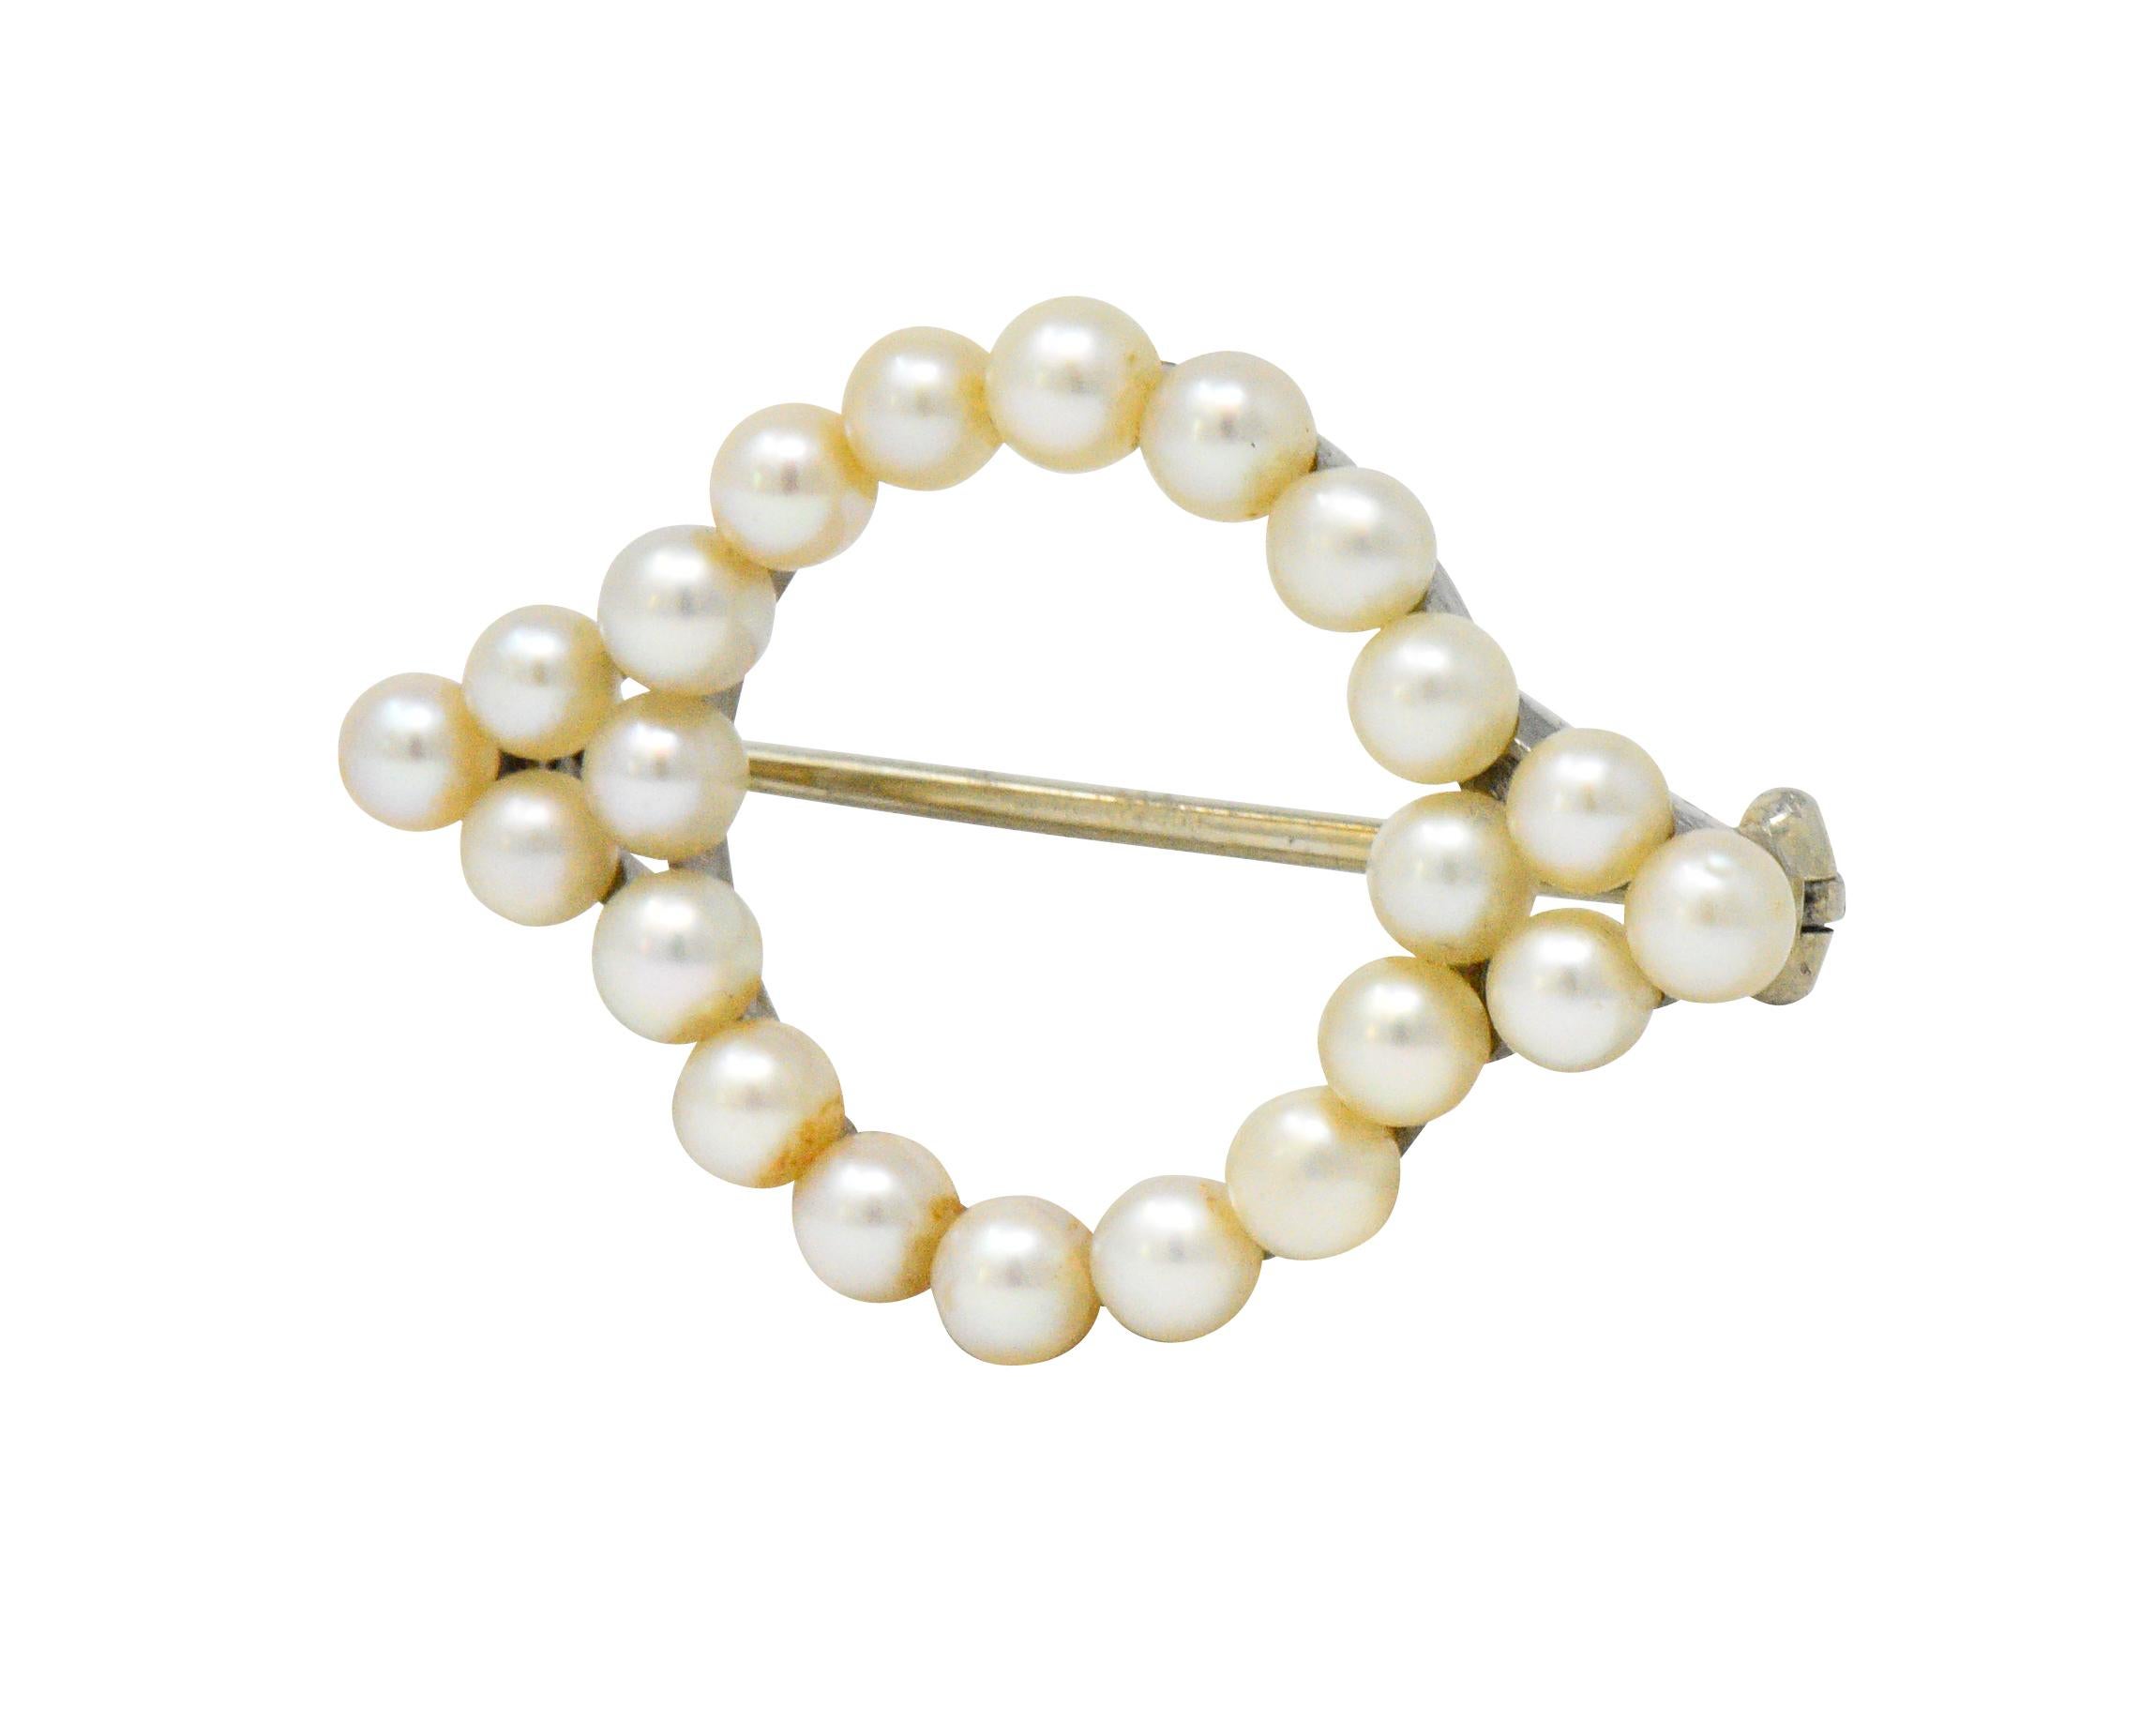 Featuring 22 white cultured pearls on platinum setting

Pearls are 4.5 mm with good to very good luster and pale pink shades

Circa 1940's and signed Cartier

Measures 1 3/8